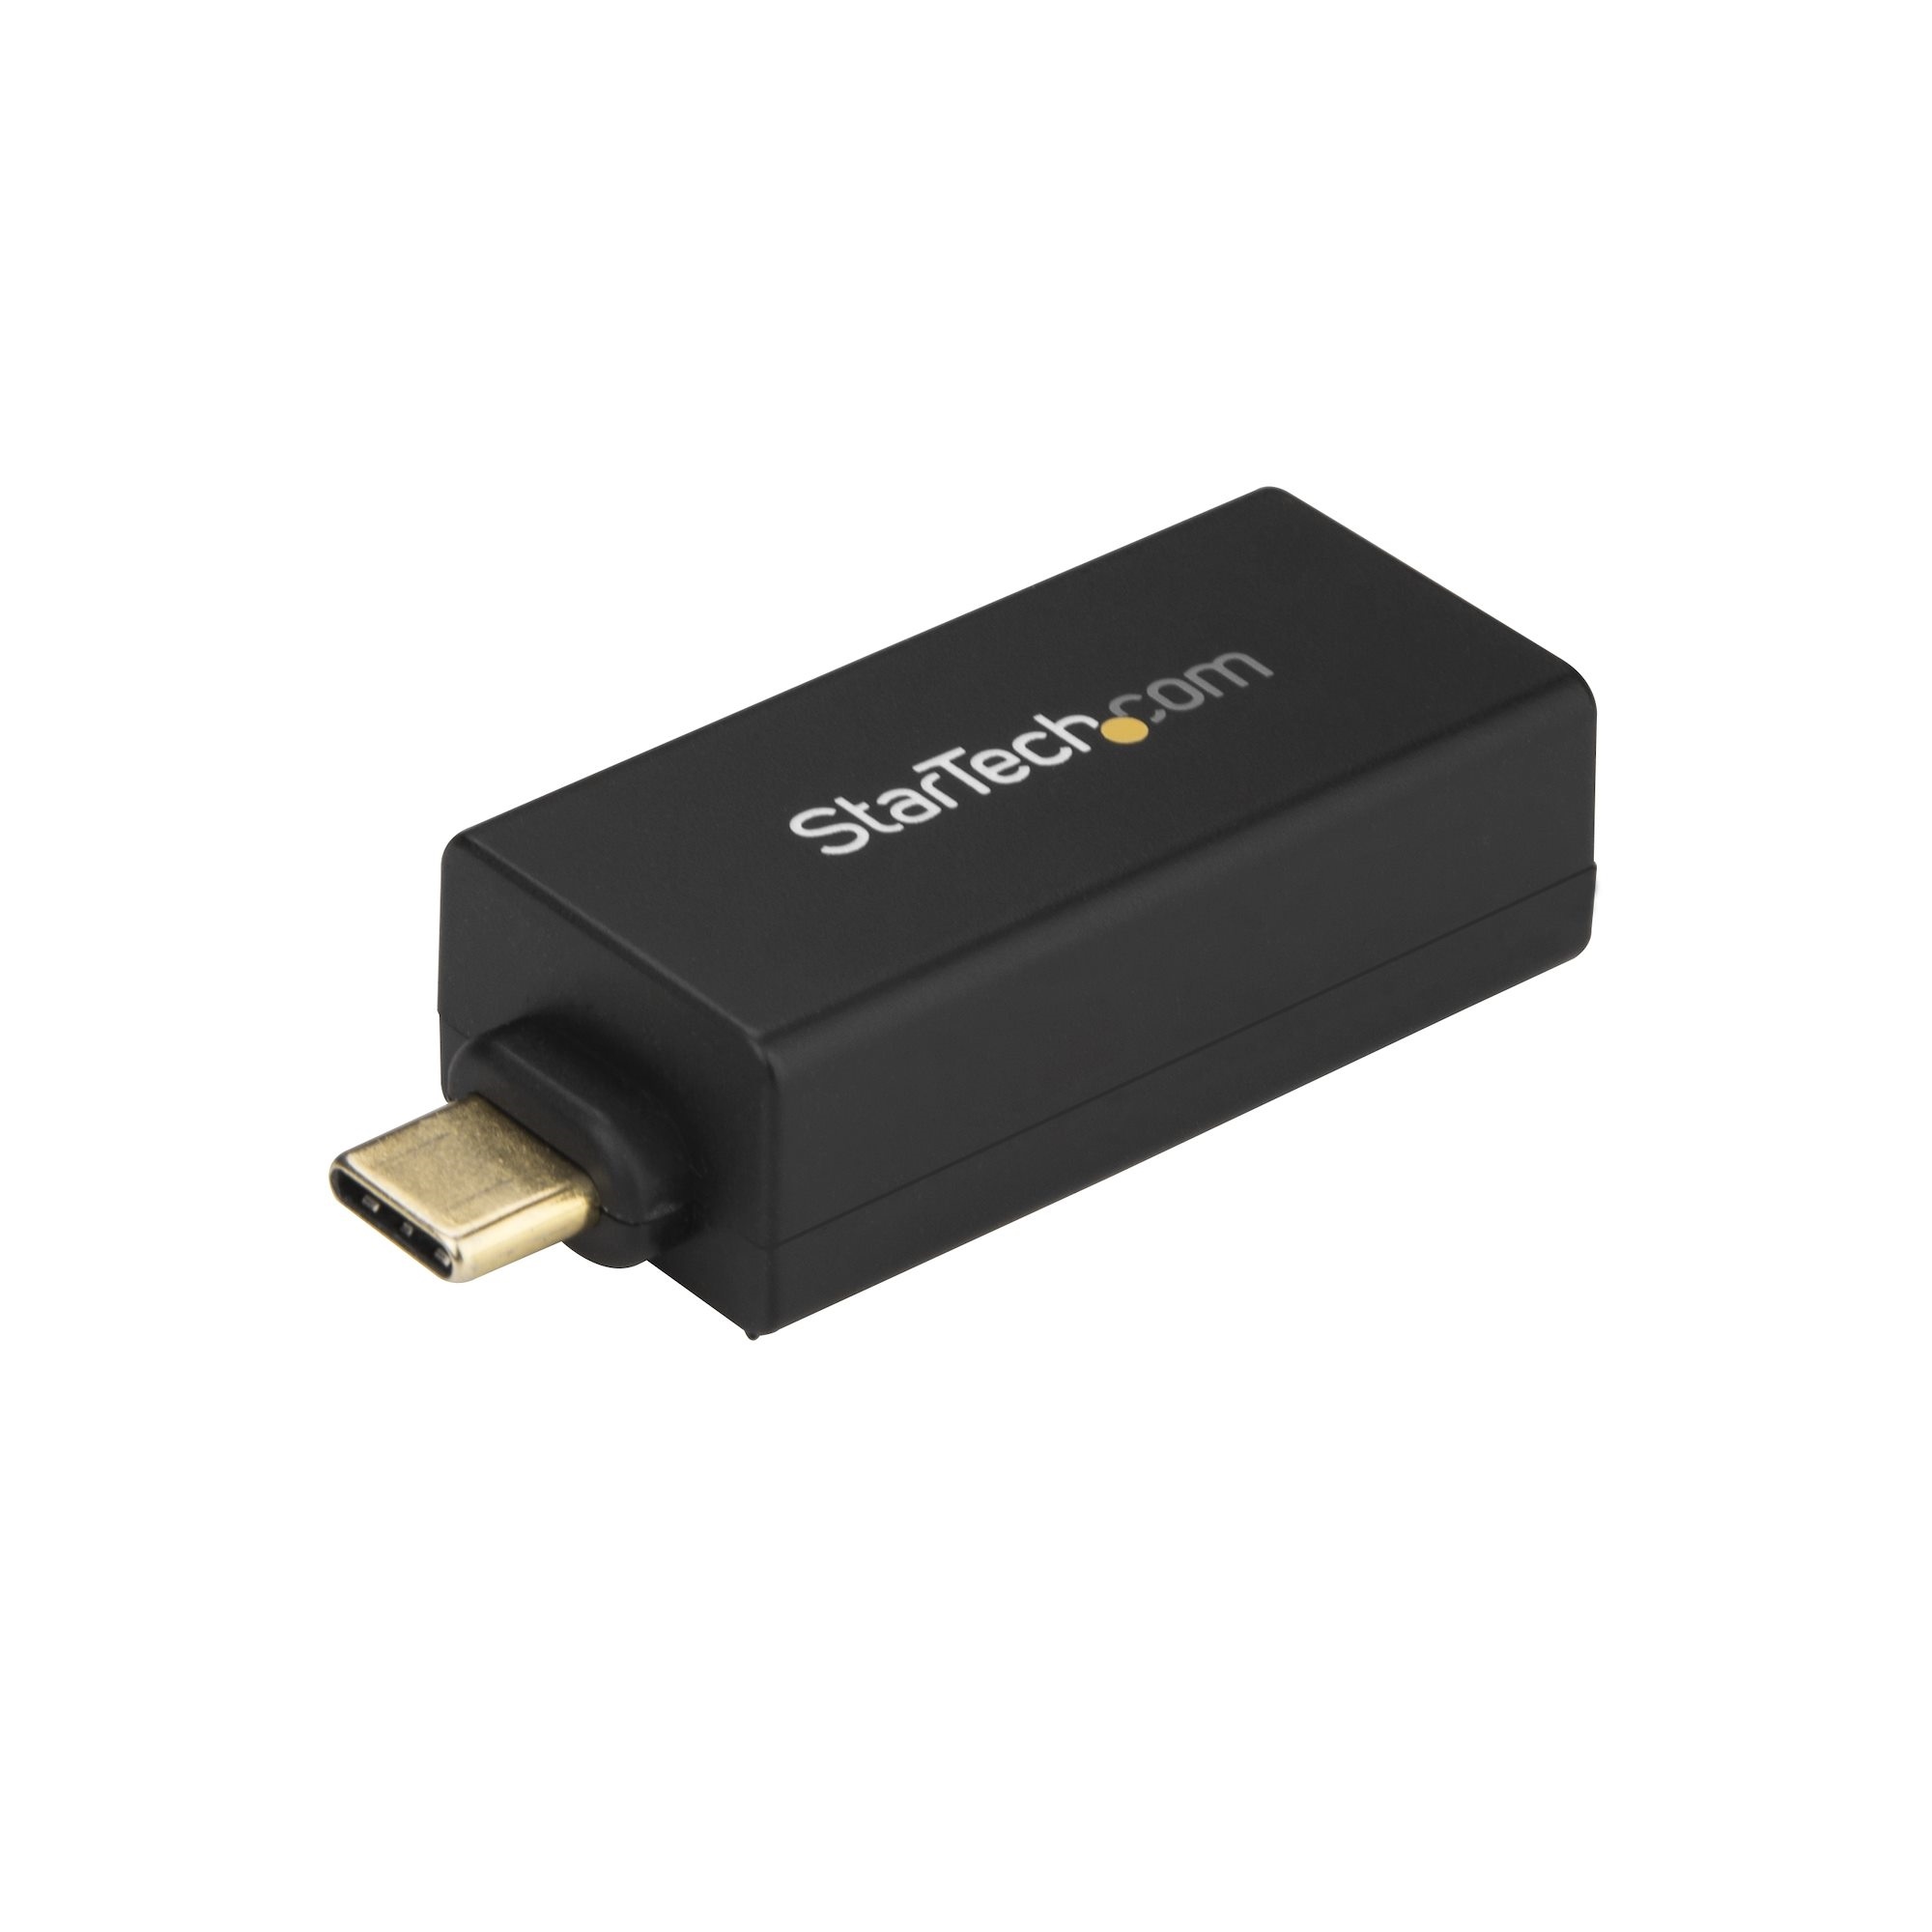 StarTech Network Adapter - USB C to GbE - USB 3.0